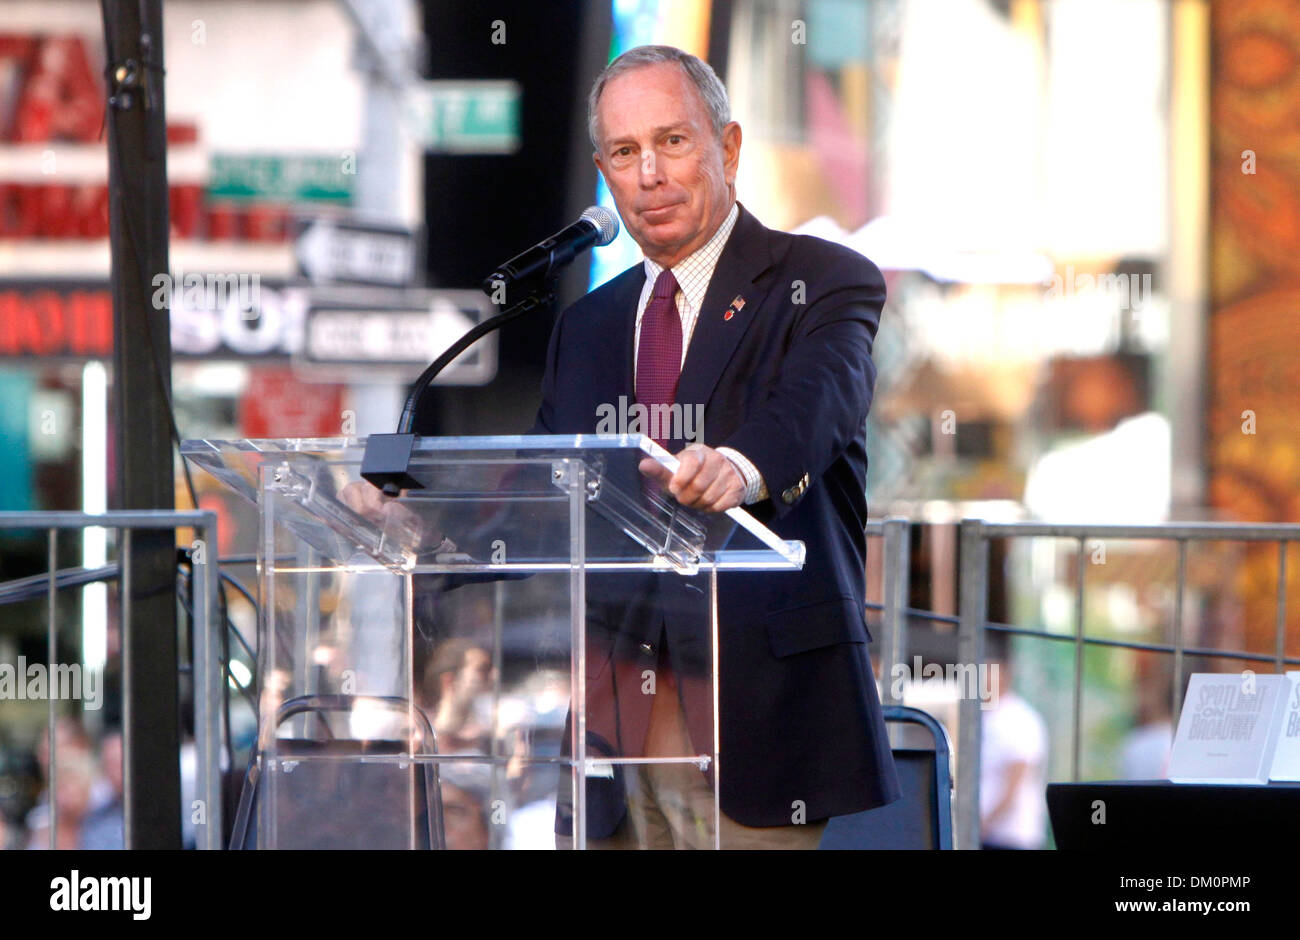 Mayor Michael Bloomberg Free Concert entitled ‘Broadway On Broadway’ held in Times Square New York City USA – 09.09.12 Stock Photo